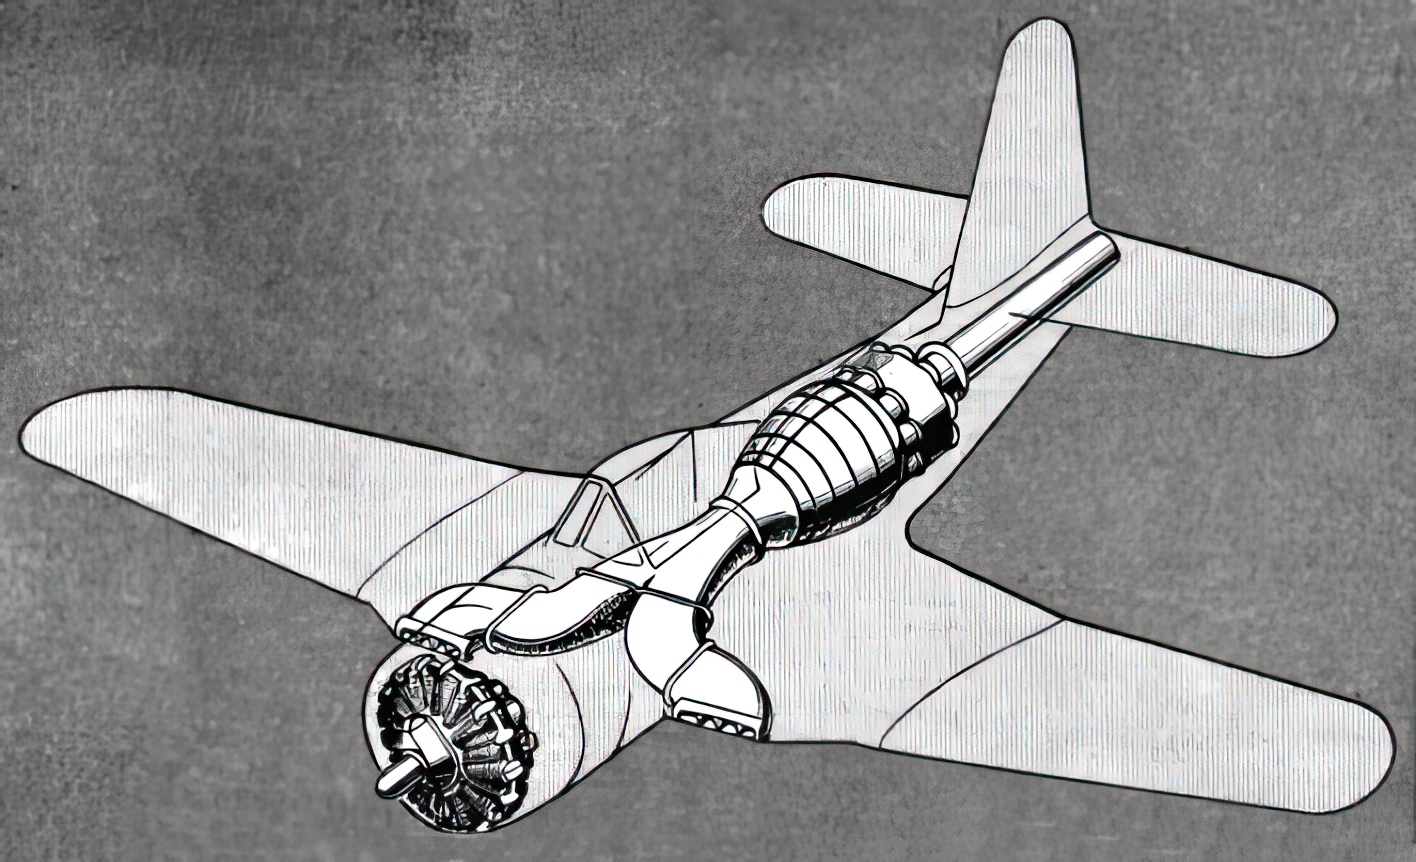 Drawing showing the engine arrangement of the Ryan FR Fireball